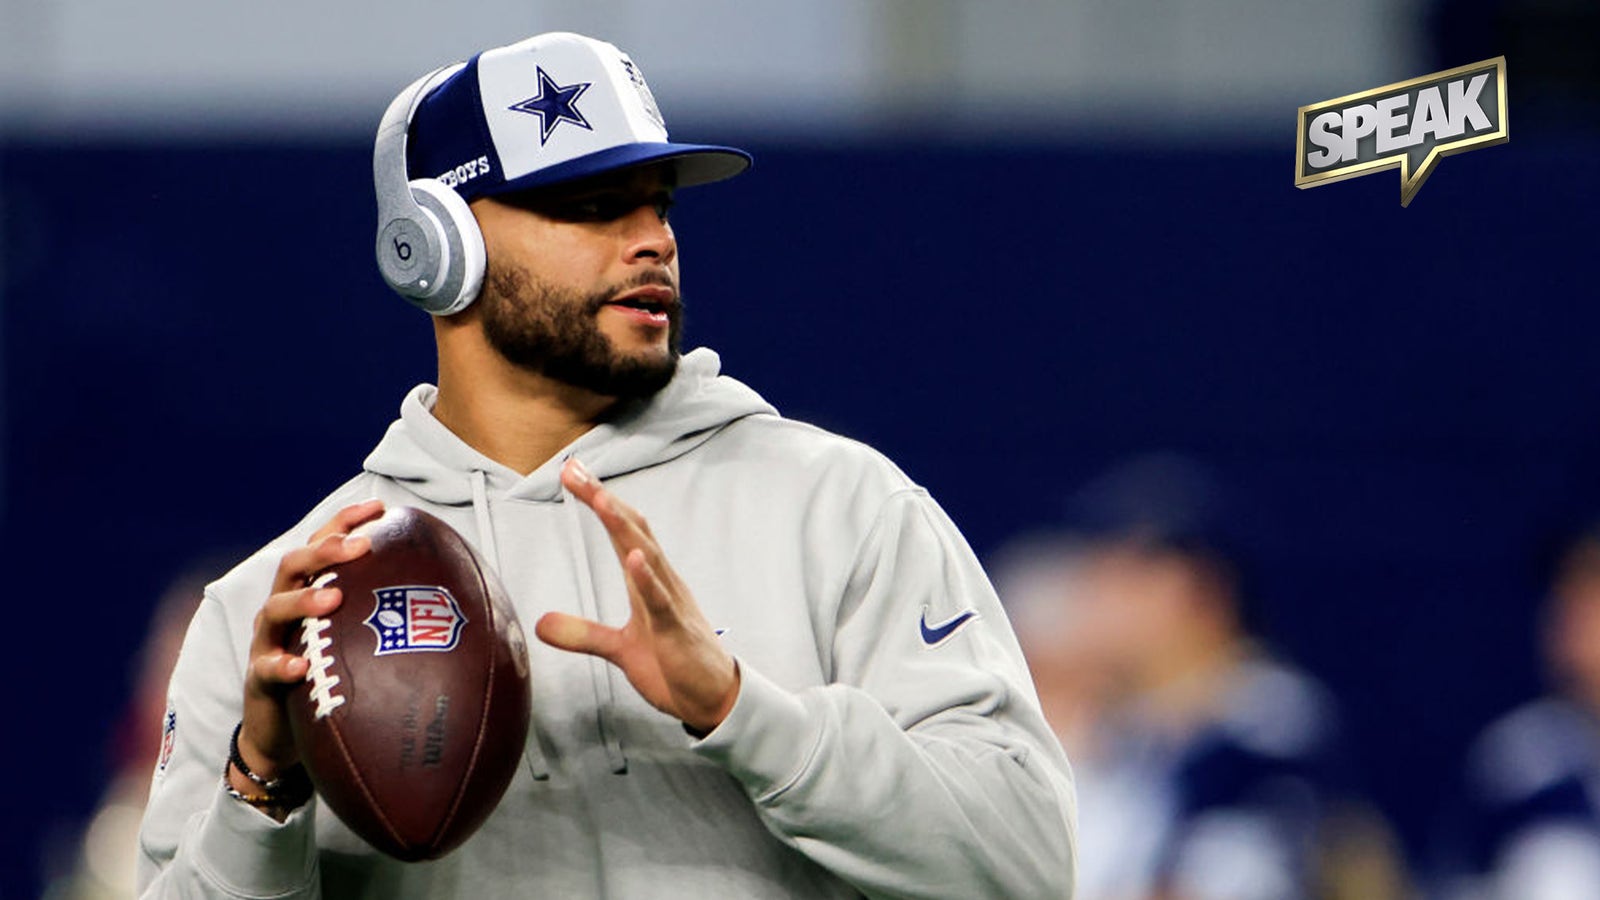 Would the Cowboys be crazy to draft a QB with Dak Prescott on the roster? 